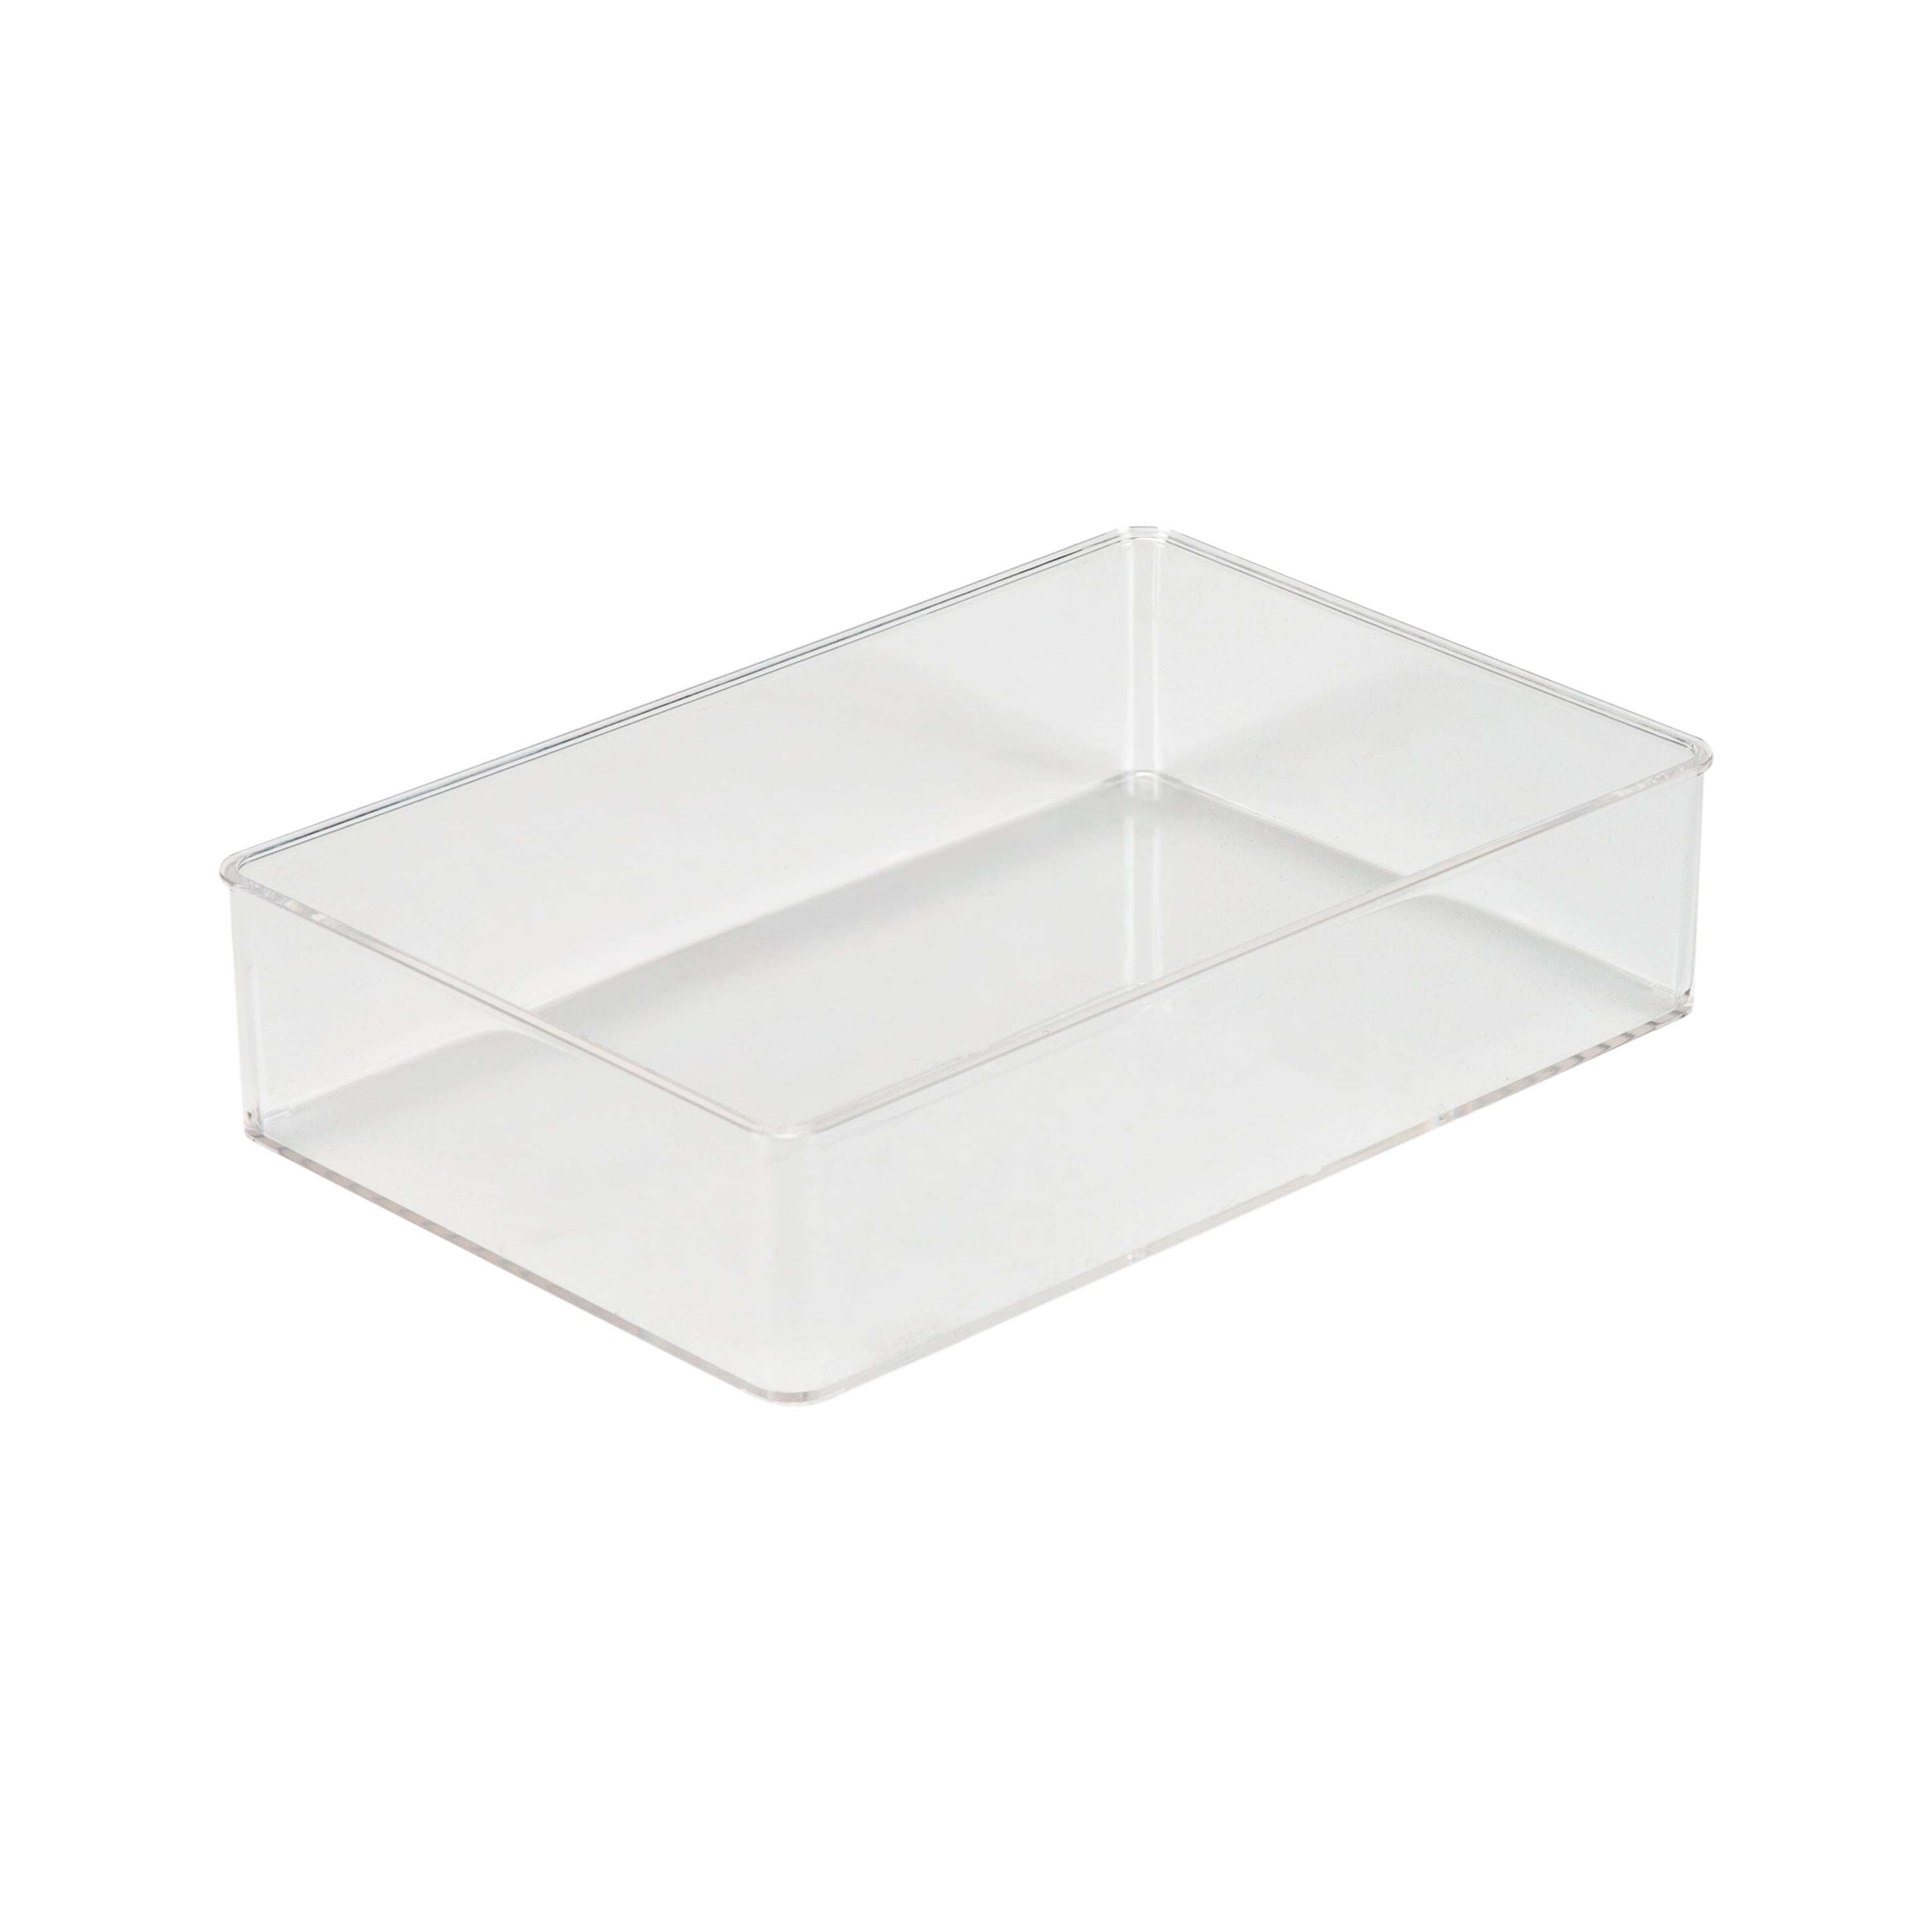 KOLORAE Drawer Organizer With Silicone Liner 9.6 x 3.1